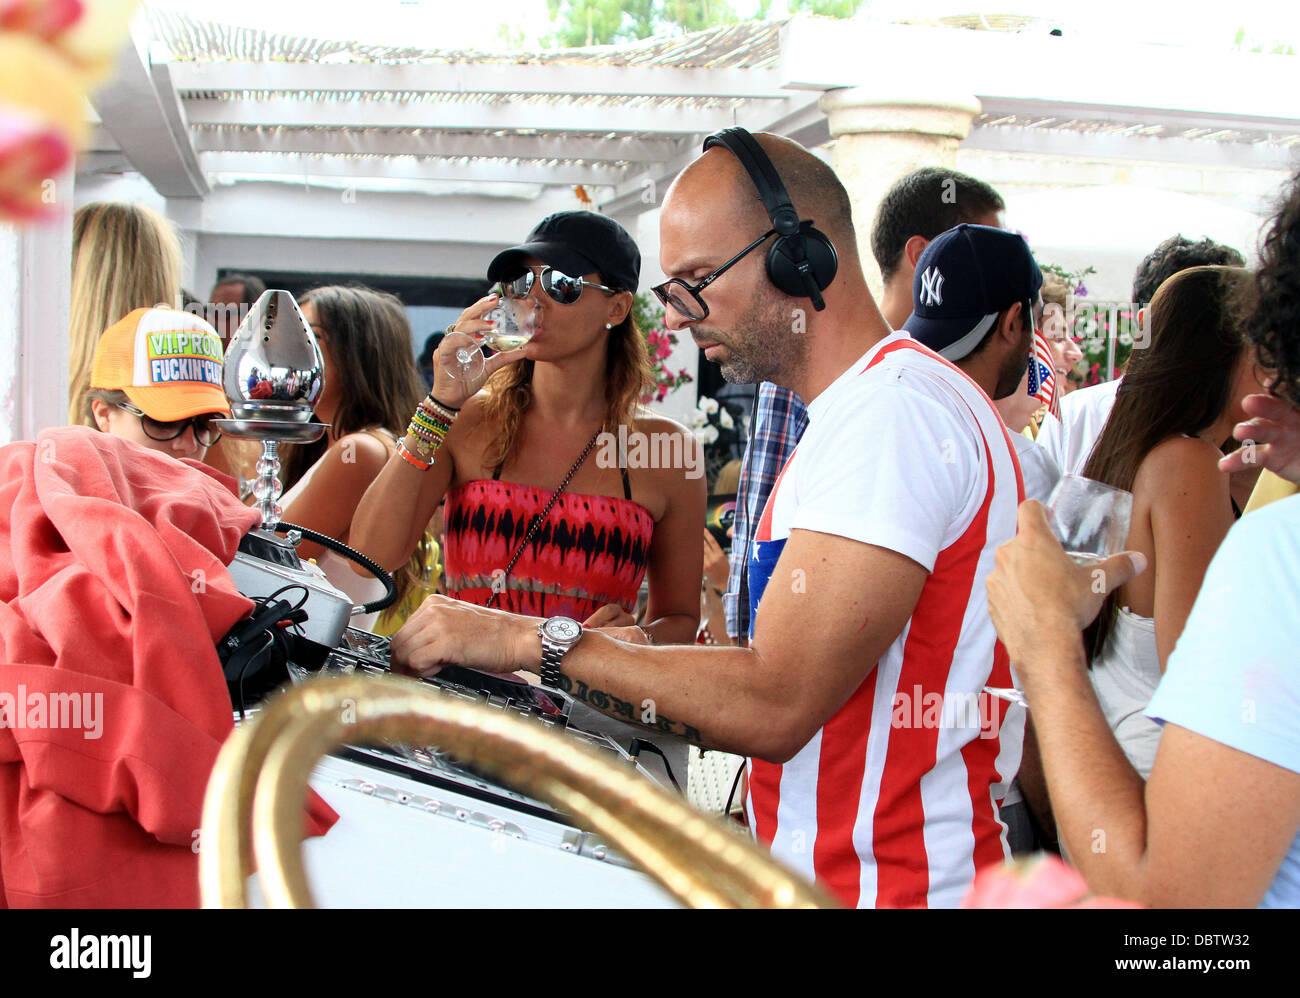 Atmosphere The Voile Rouge Beach Party in St Tropez St Tropez - 19.08.11  Stock Photo - Alamy